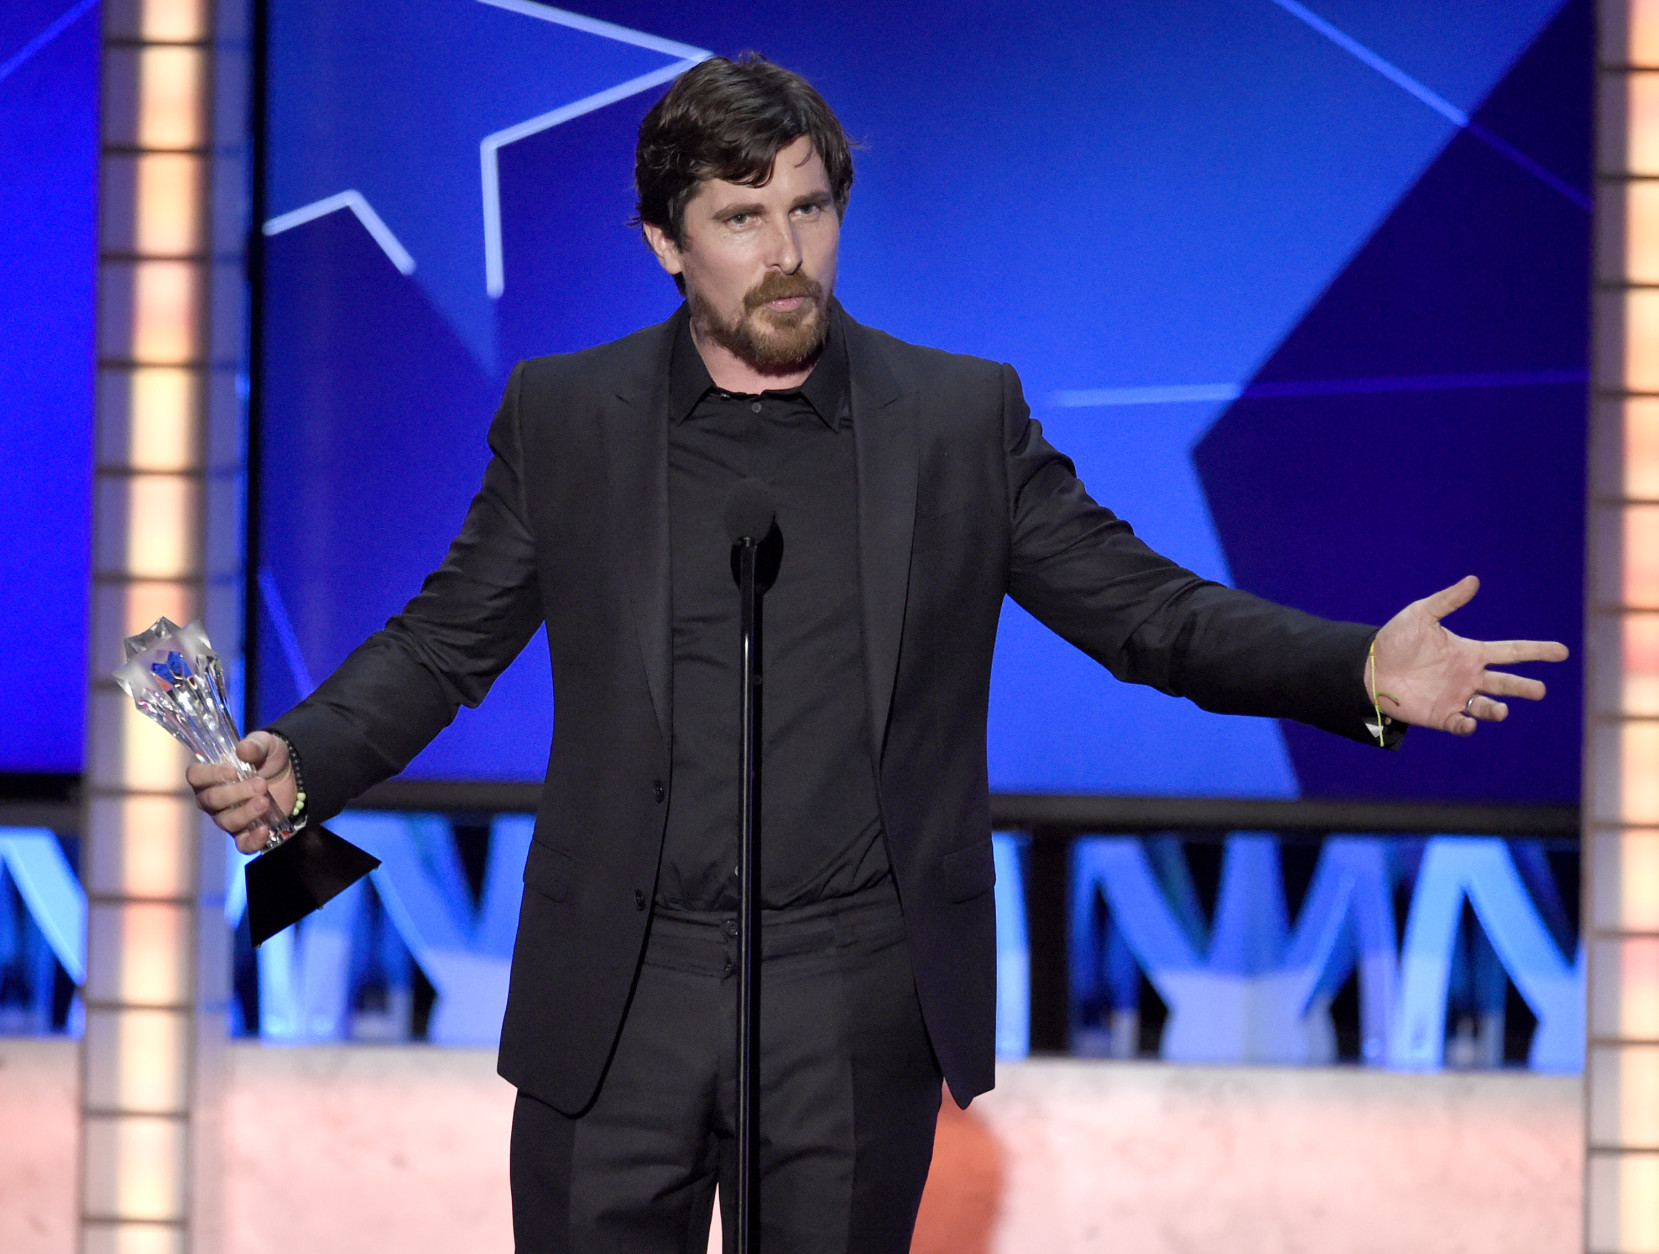 Christian Bale accepts the award for best actor in a comedy for The Big Short at the 21st annual Critics' Choice Awards at the Barker Hangar on Sunday, Jan. 17, 2016, in Santa Monica, Calif. (Photo by Chris Pizzello/Invision/AP)